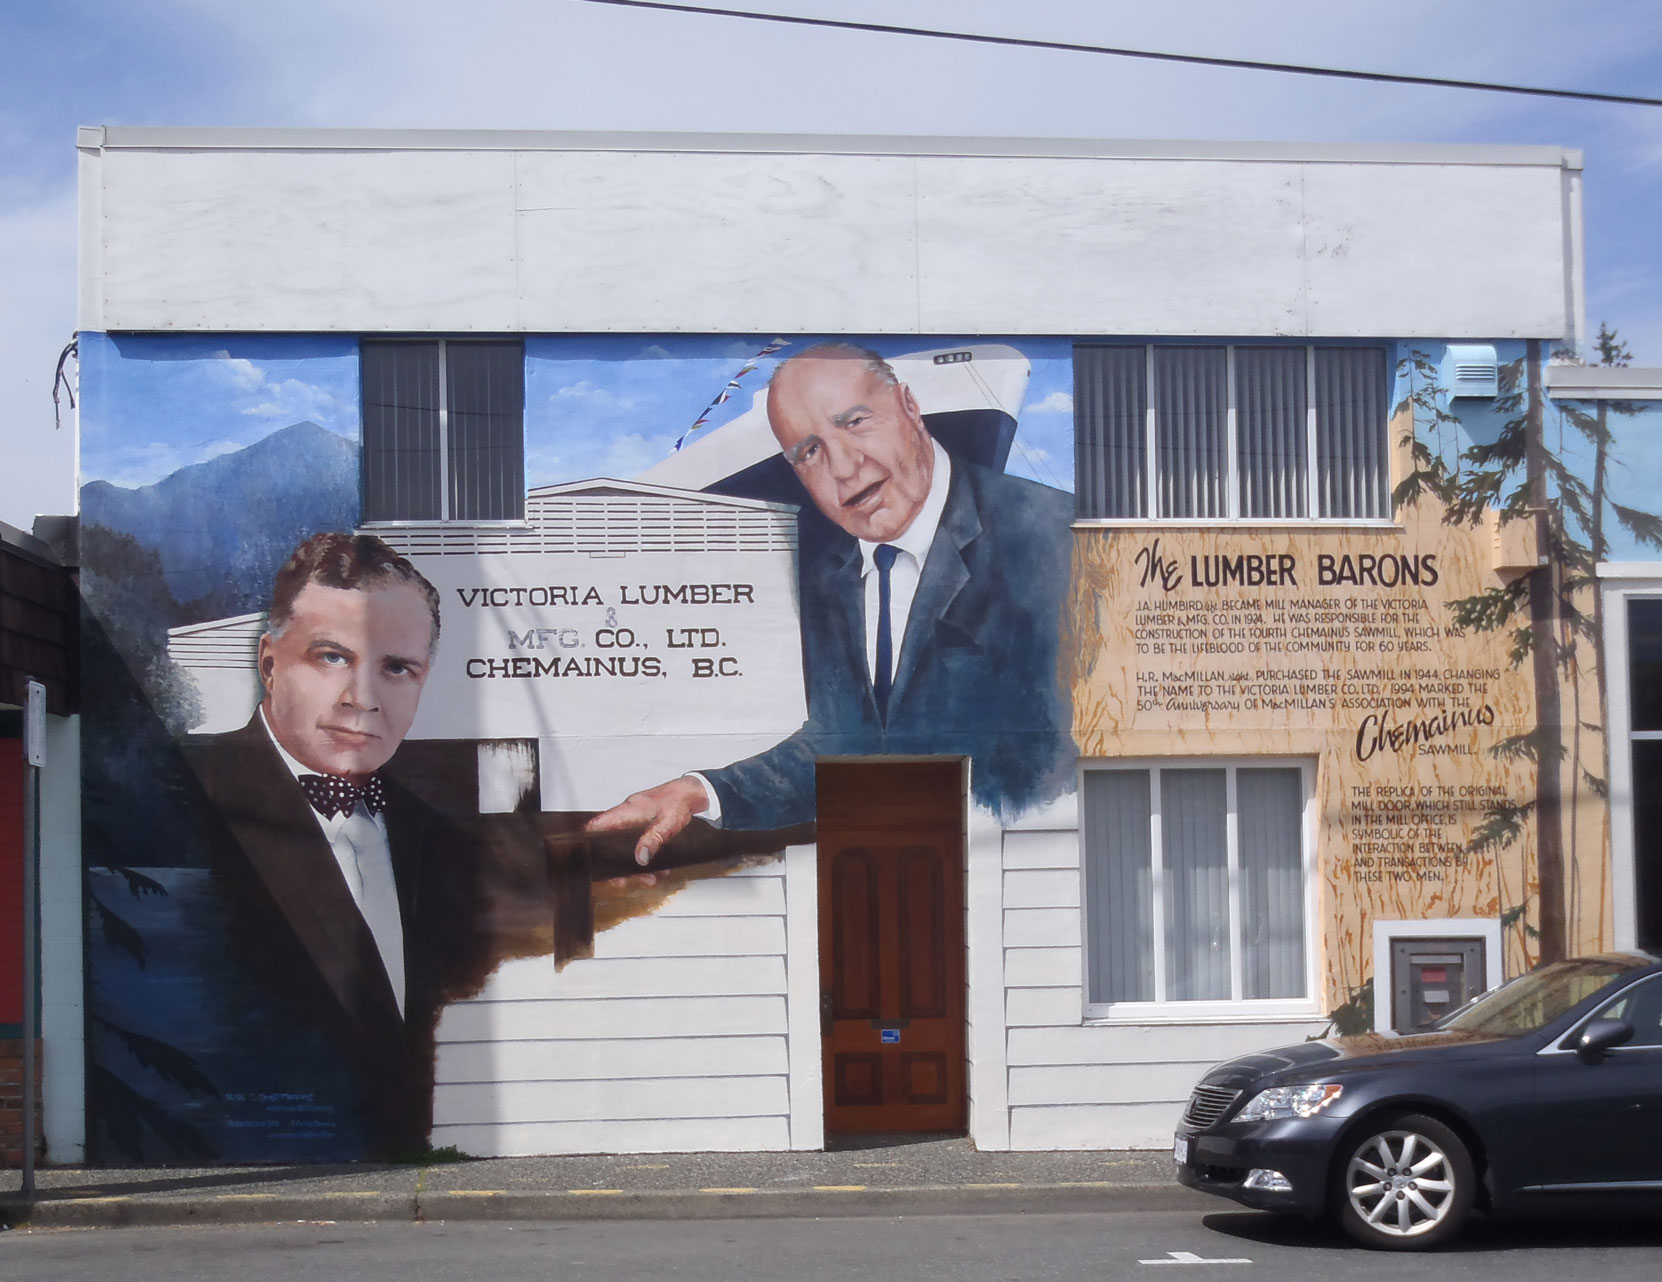 The Lumber Barons (John A. Humbird & Bloedel) mural in downtown Chemainus, B.C. (photo by Temple Lodge No. 33 Historian)